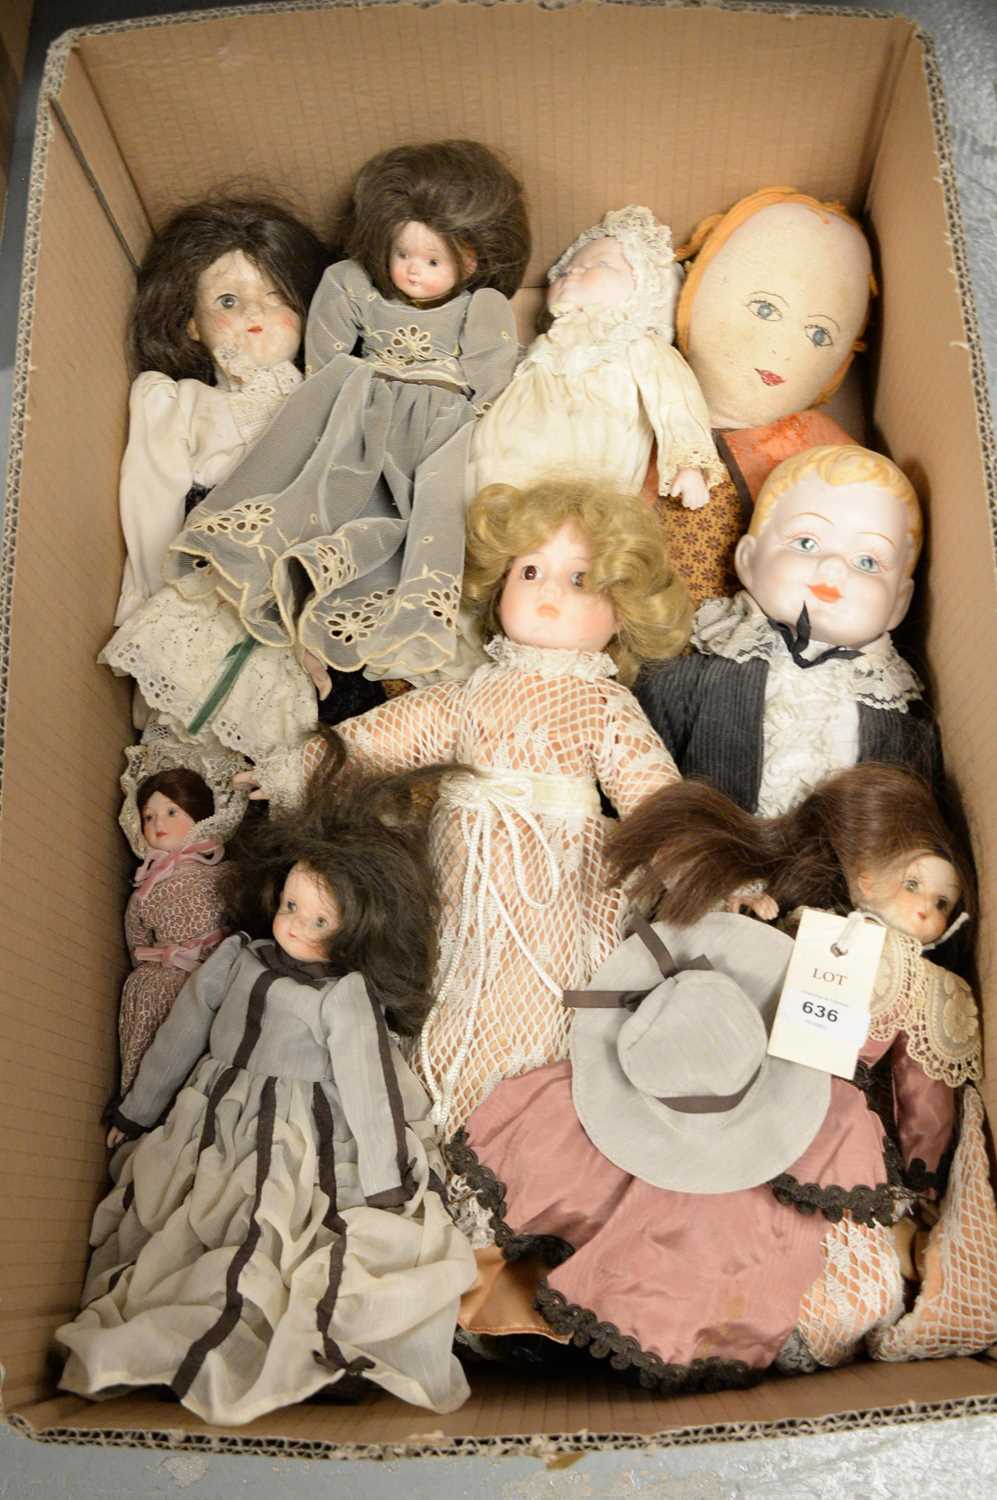 A collection of 20th century porcelain and other dolls